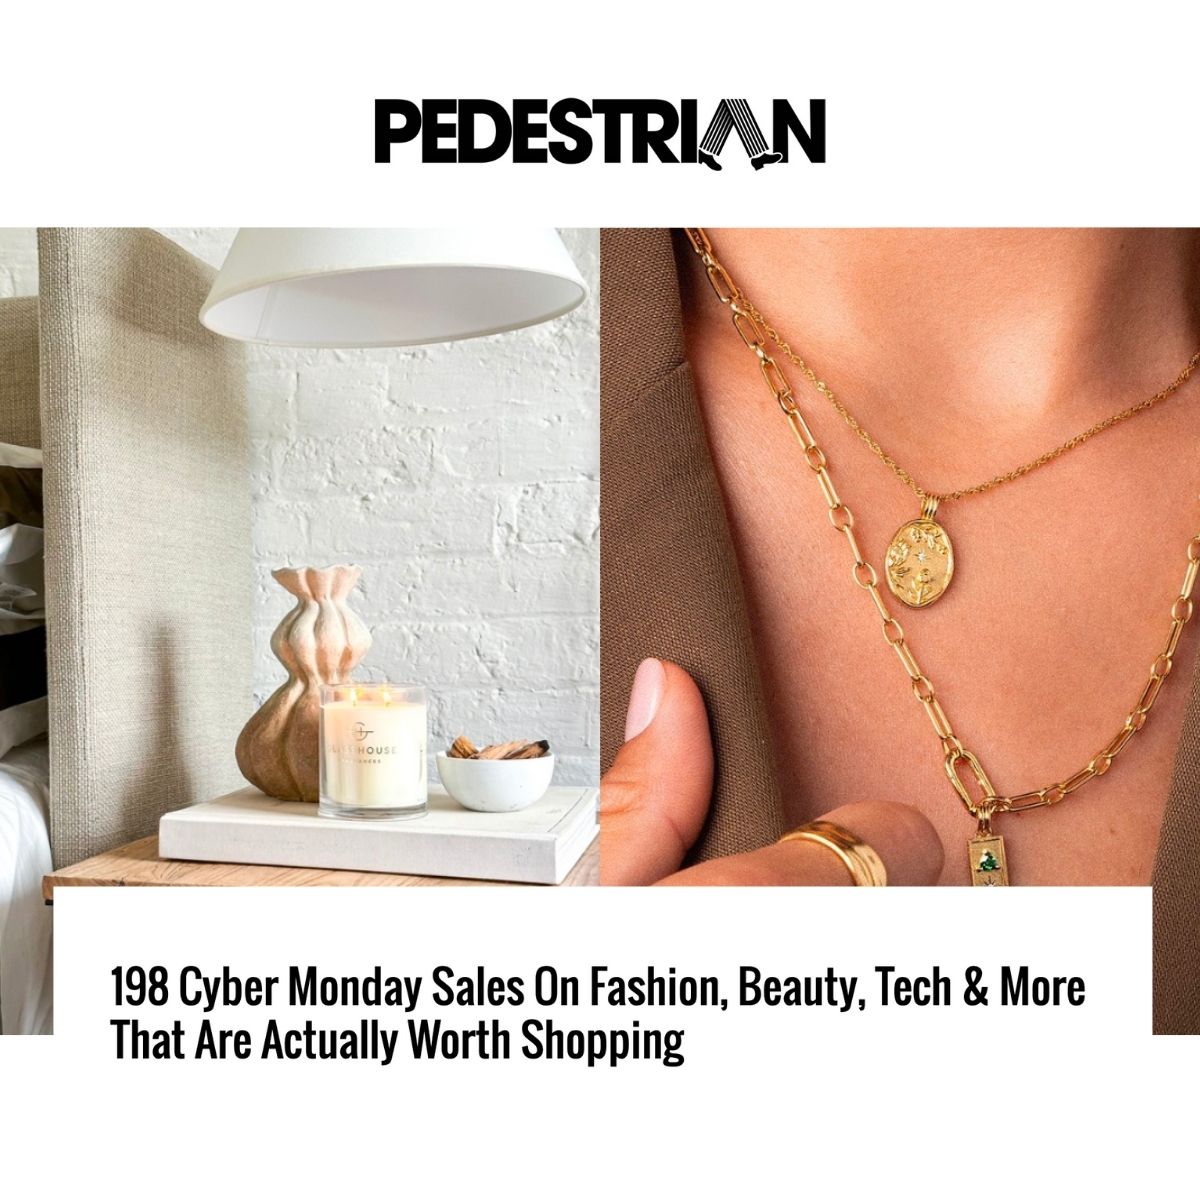 198 Cyber Monday Sales On Fashion, Beauty, Tech & More That Are Actually Worth Shopping